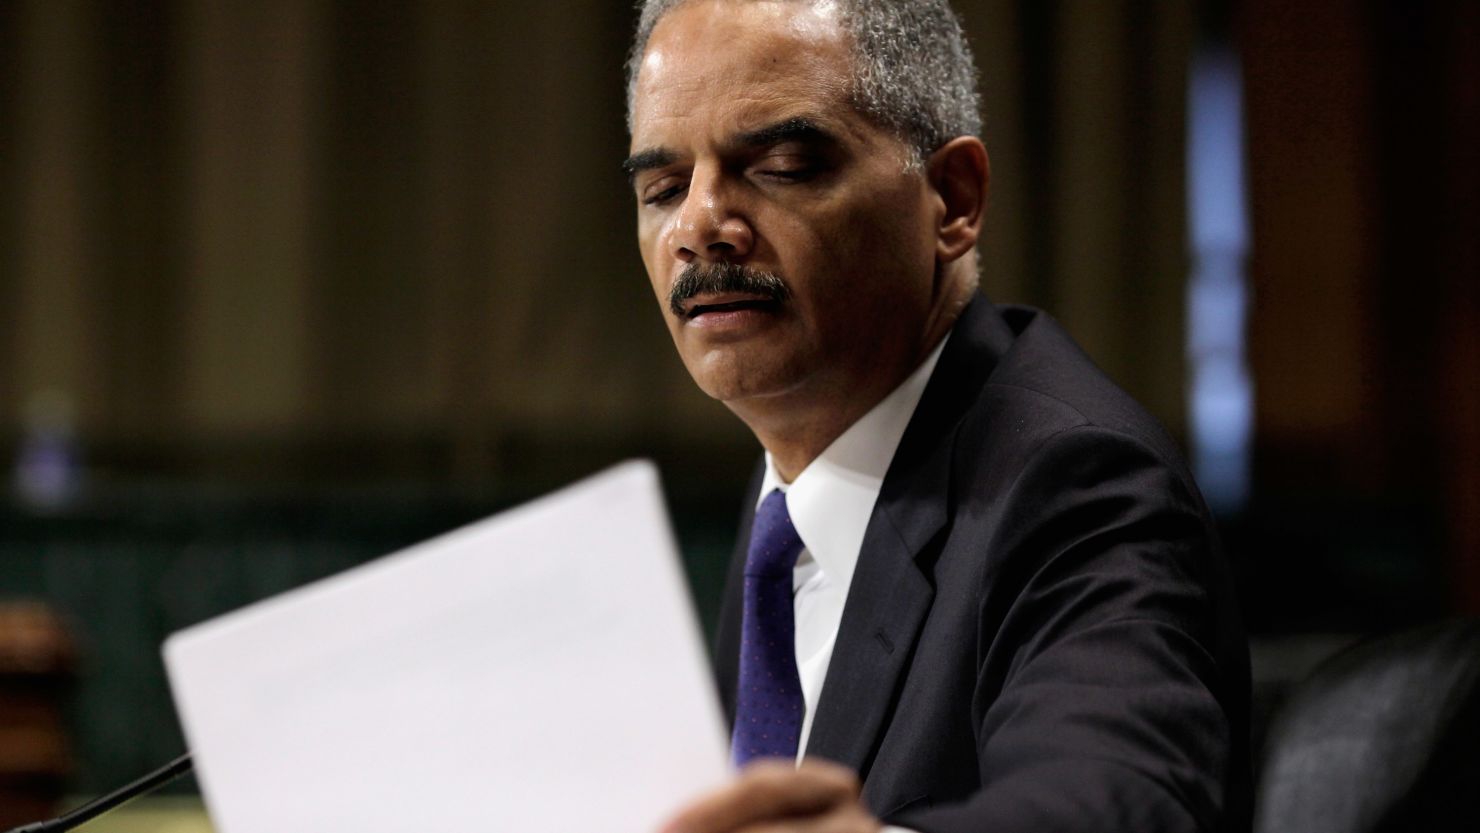 Republicans say Attorney General Eric Holder and the Justice Department are concealing details on Fast and Furious.